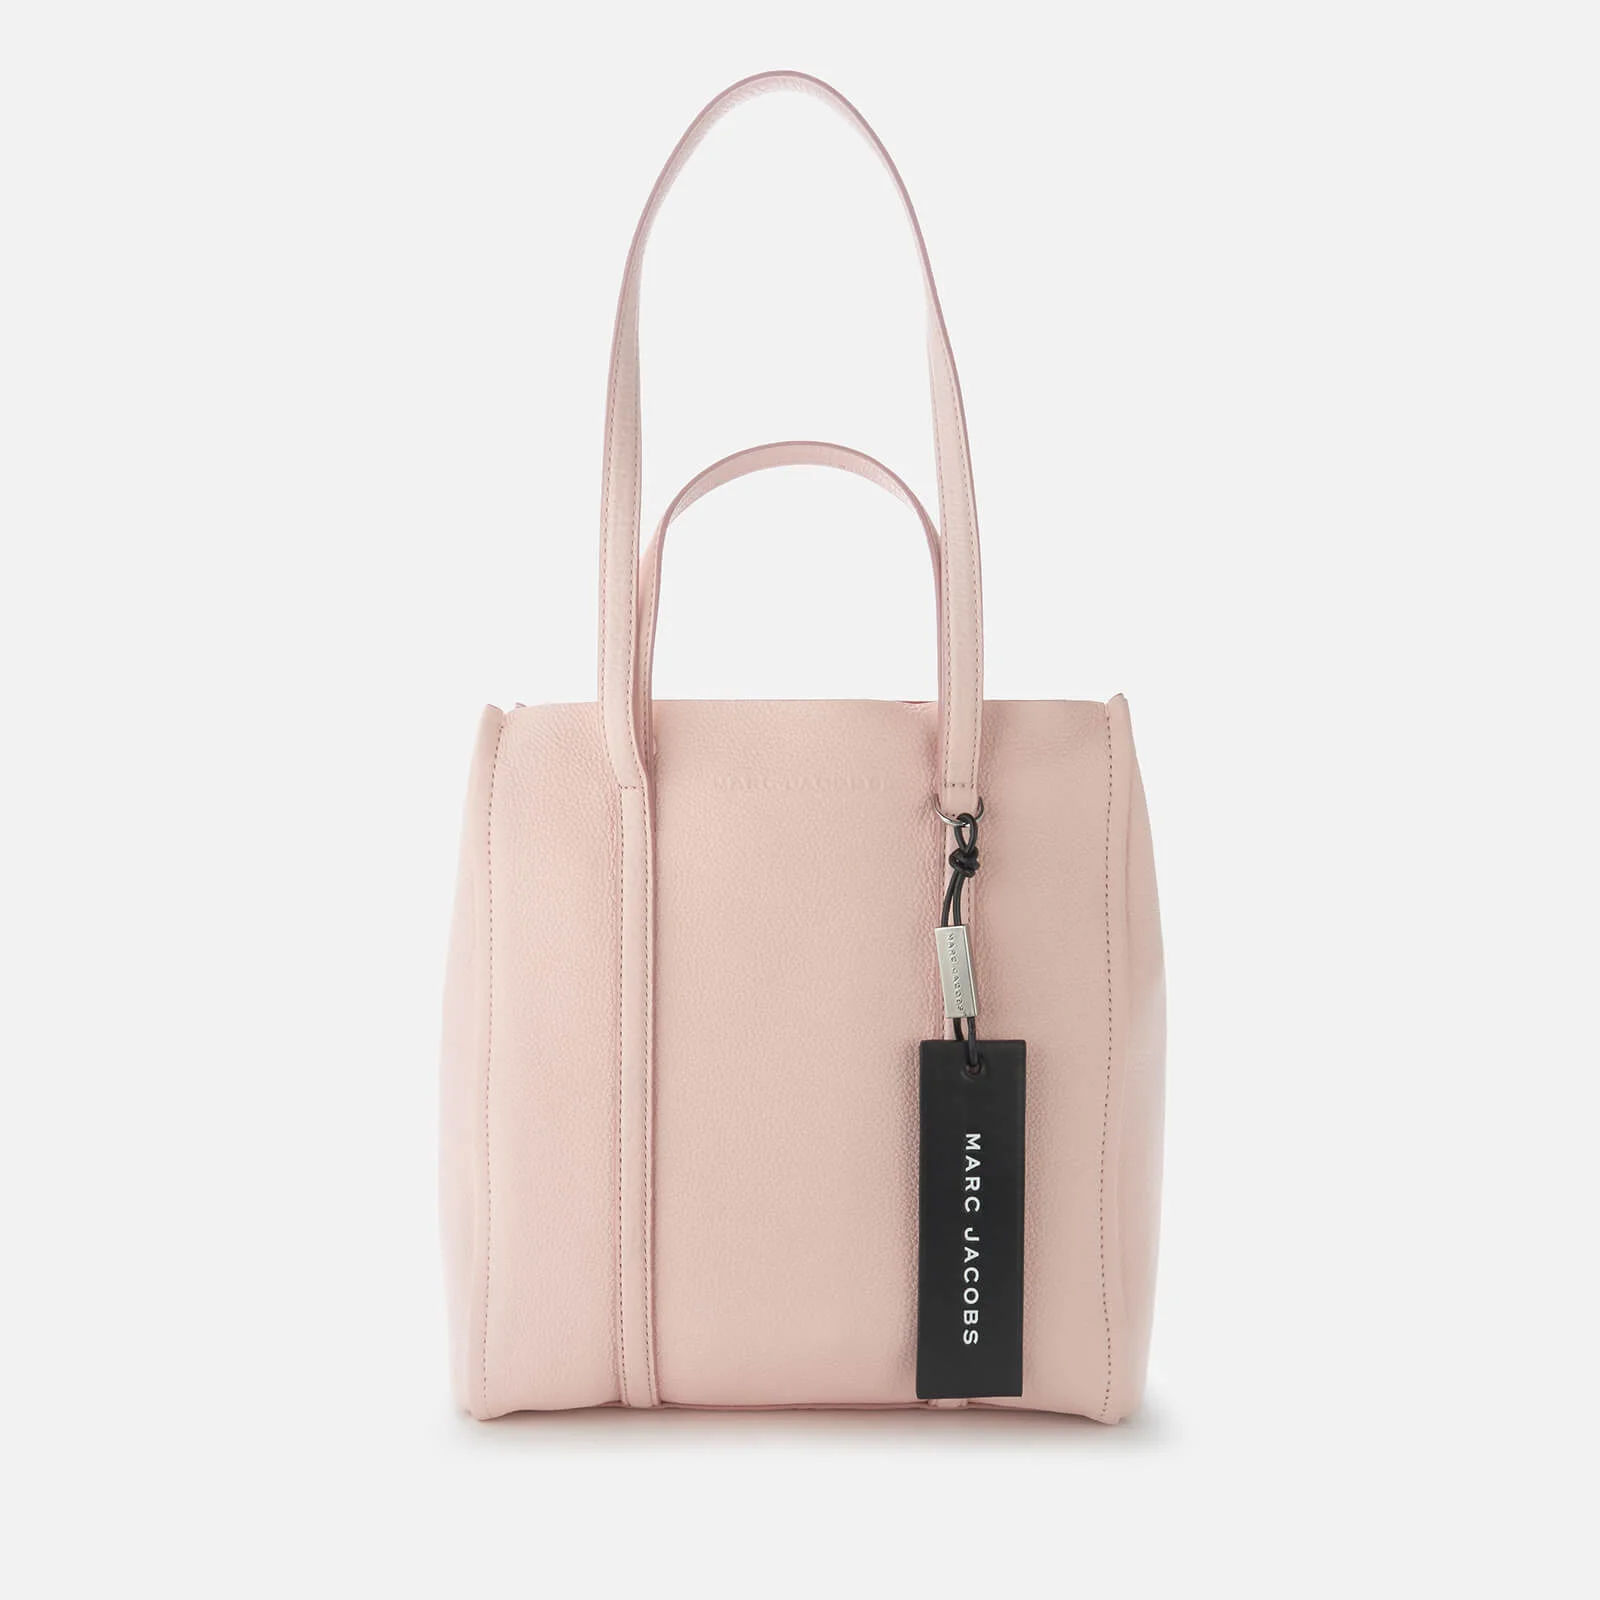 Marc Jacobs Women's 27 The Tag Tote Bag - Blush Image 1